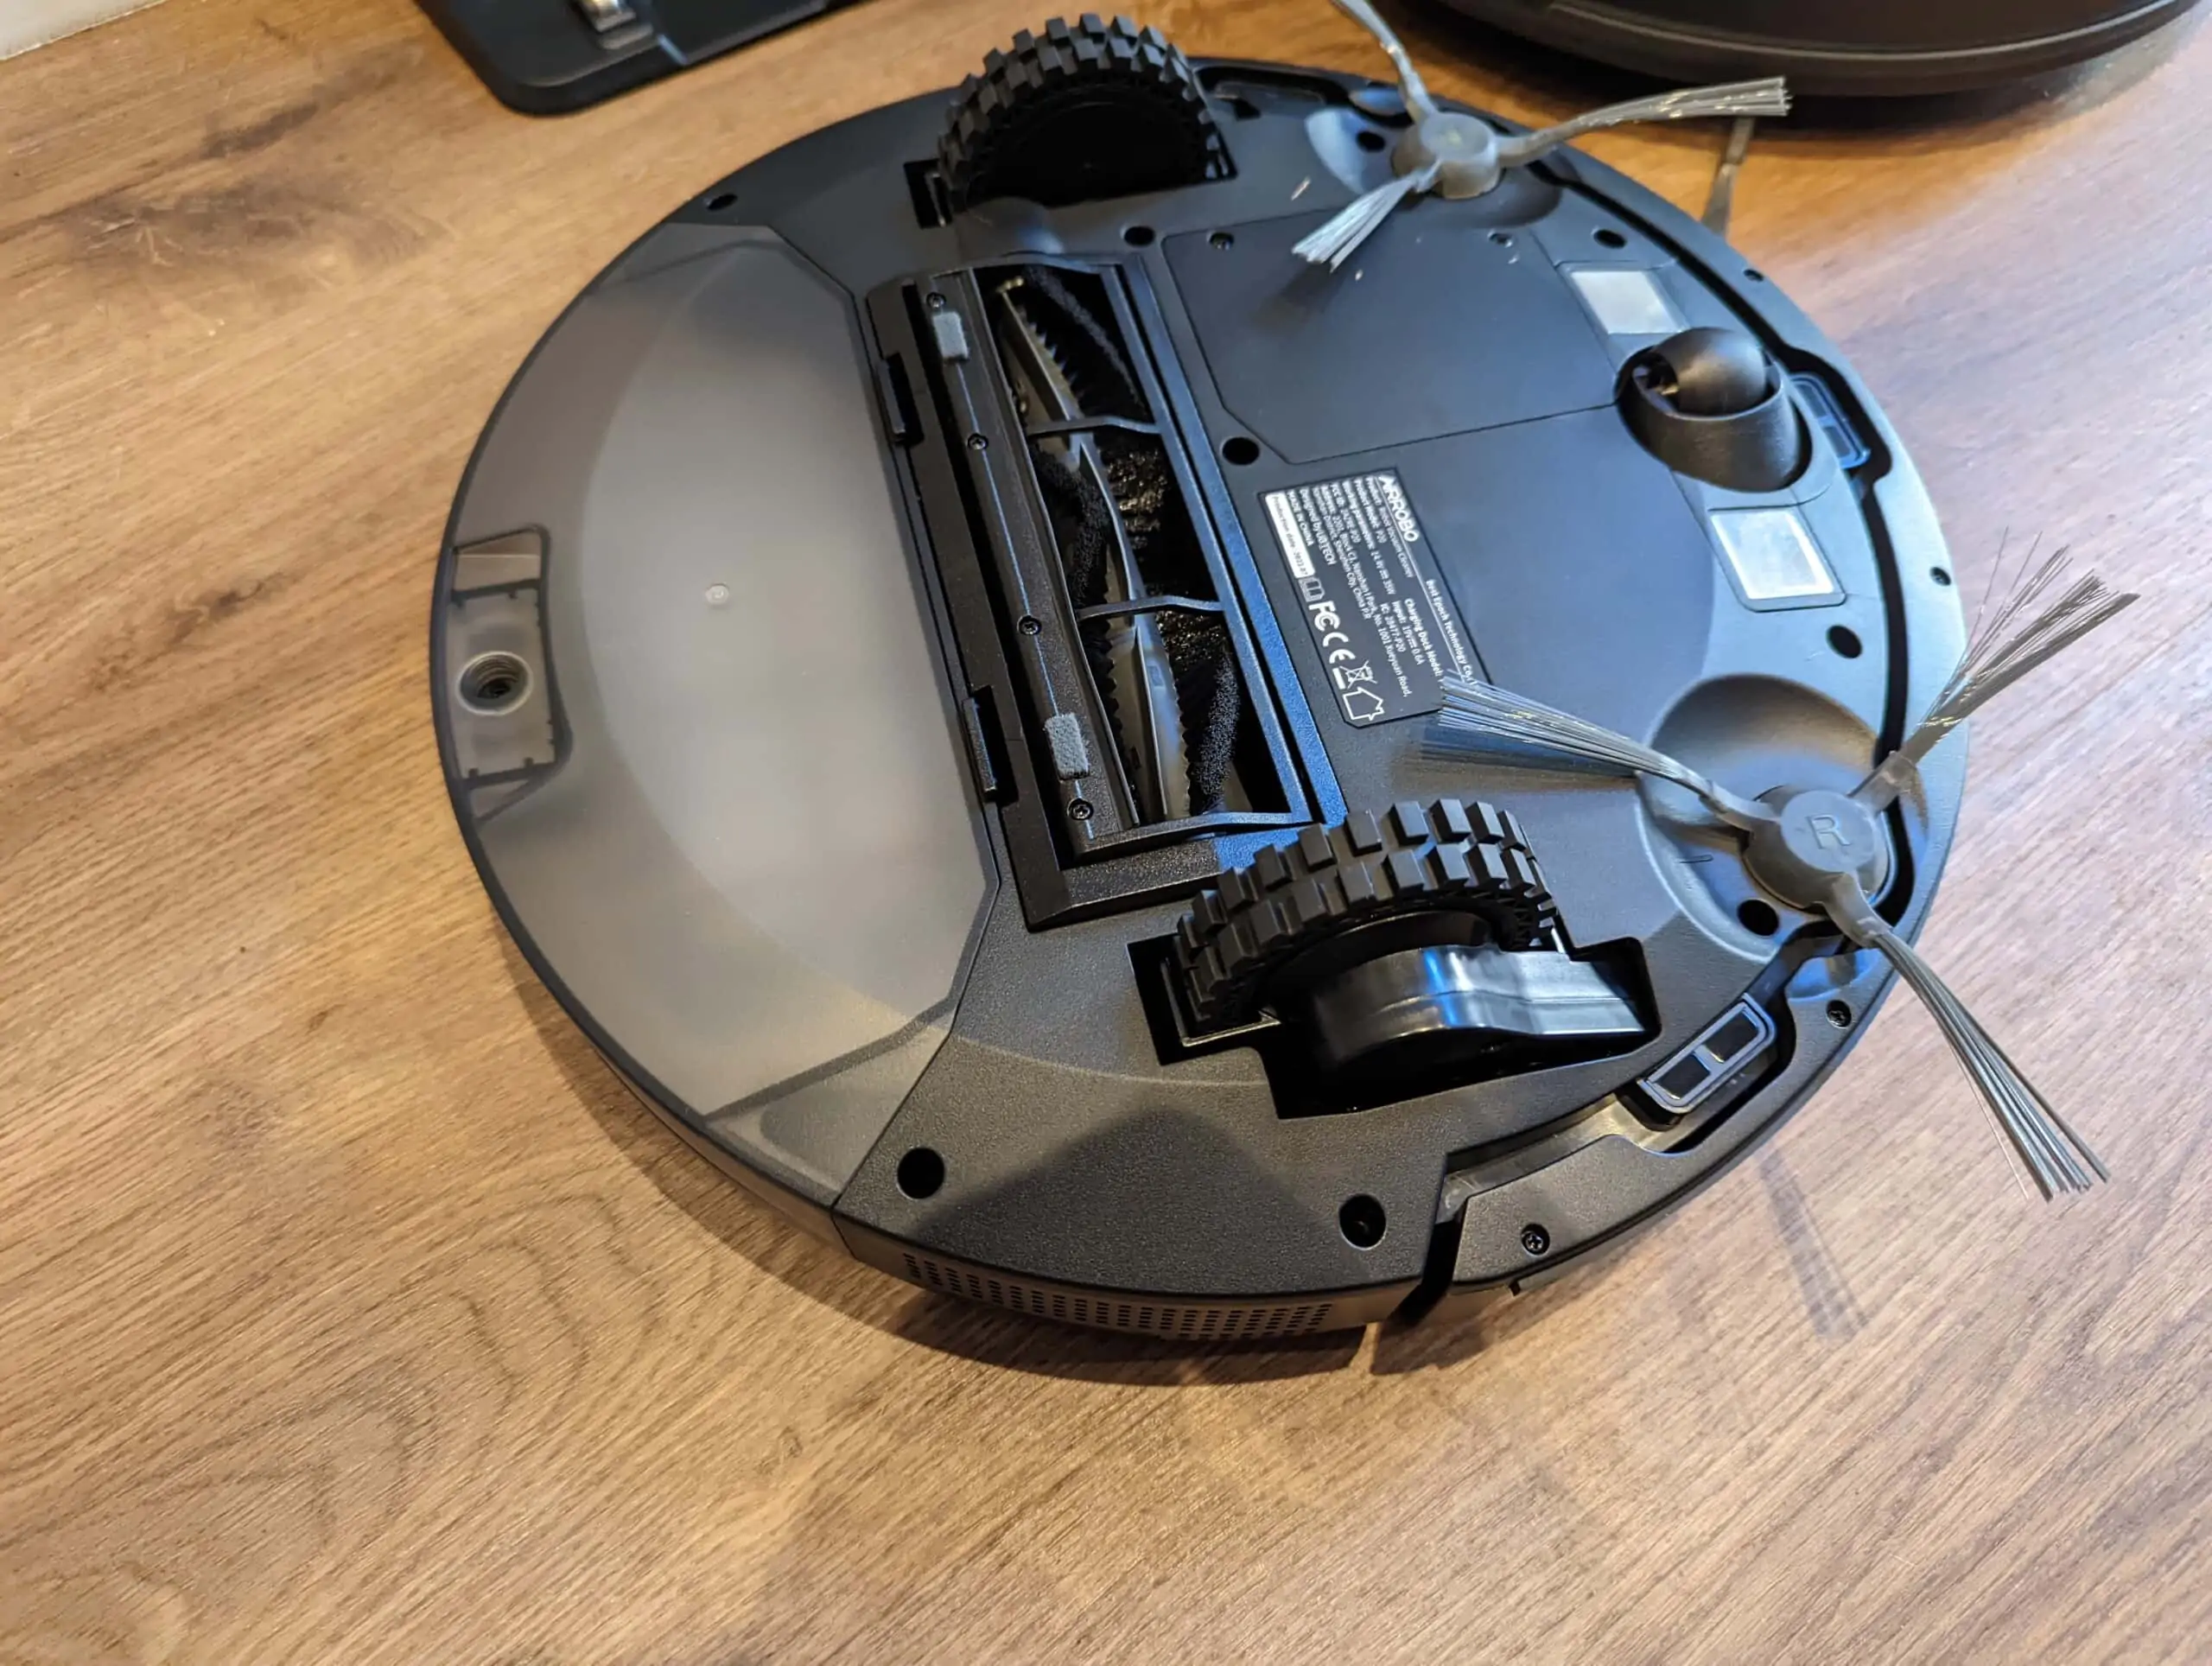 AIRROBO P20 Robot Vacuum Review3 scaled - AIRROBO P20 Robot Vacuum Review – A budget option with gyroscope navigation & improved cleaning vs P10